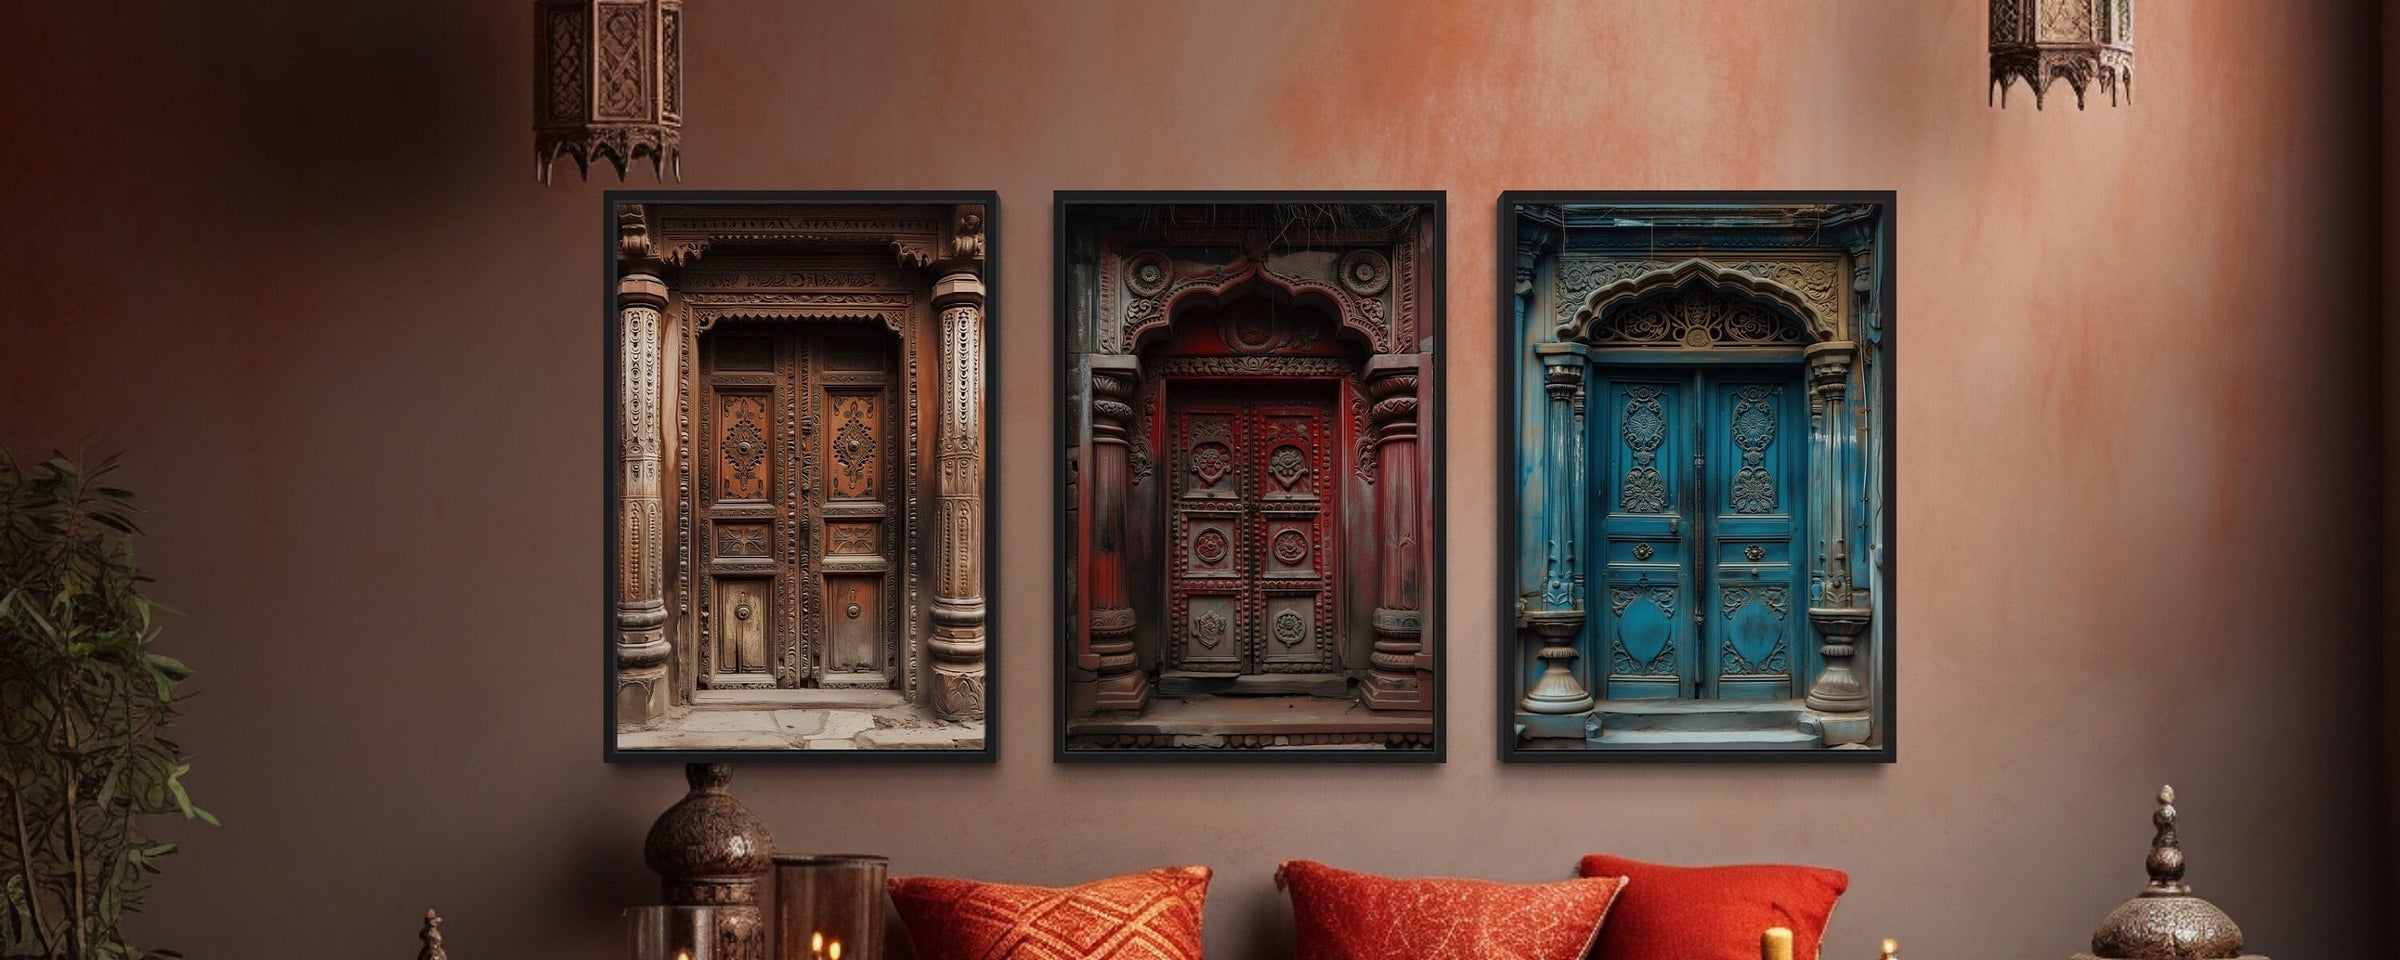 Indian Wall Art For Living Room